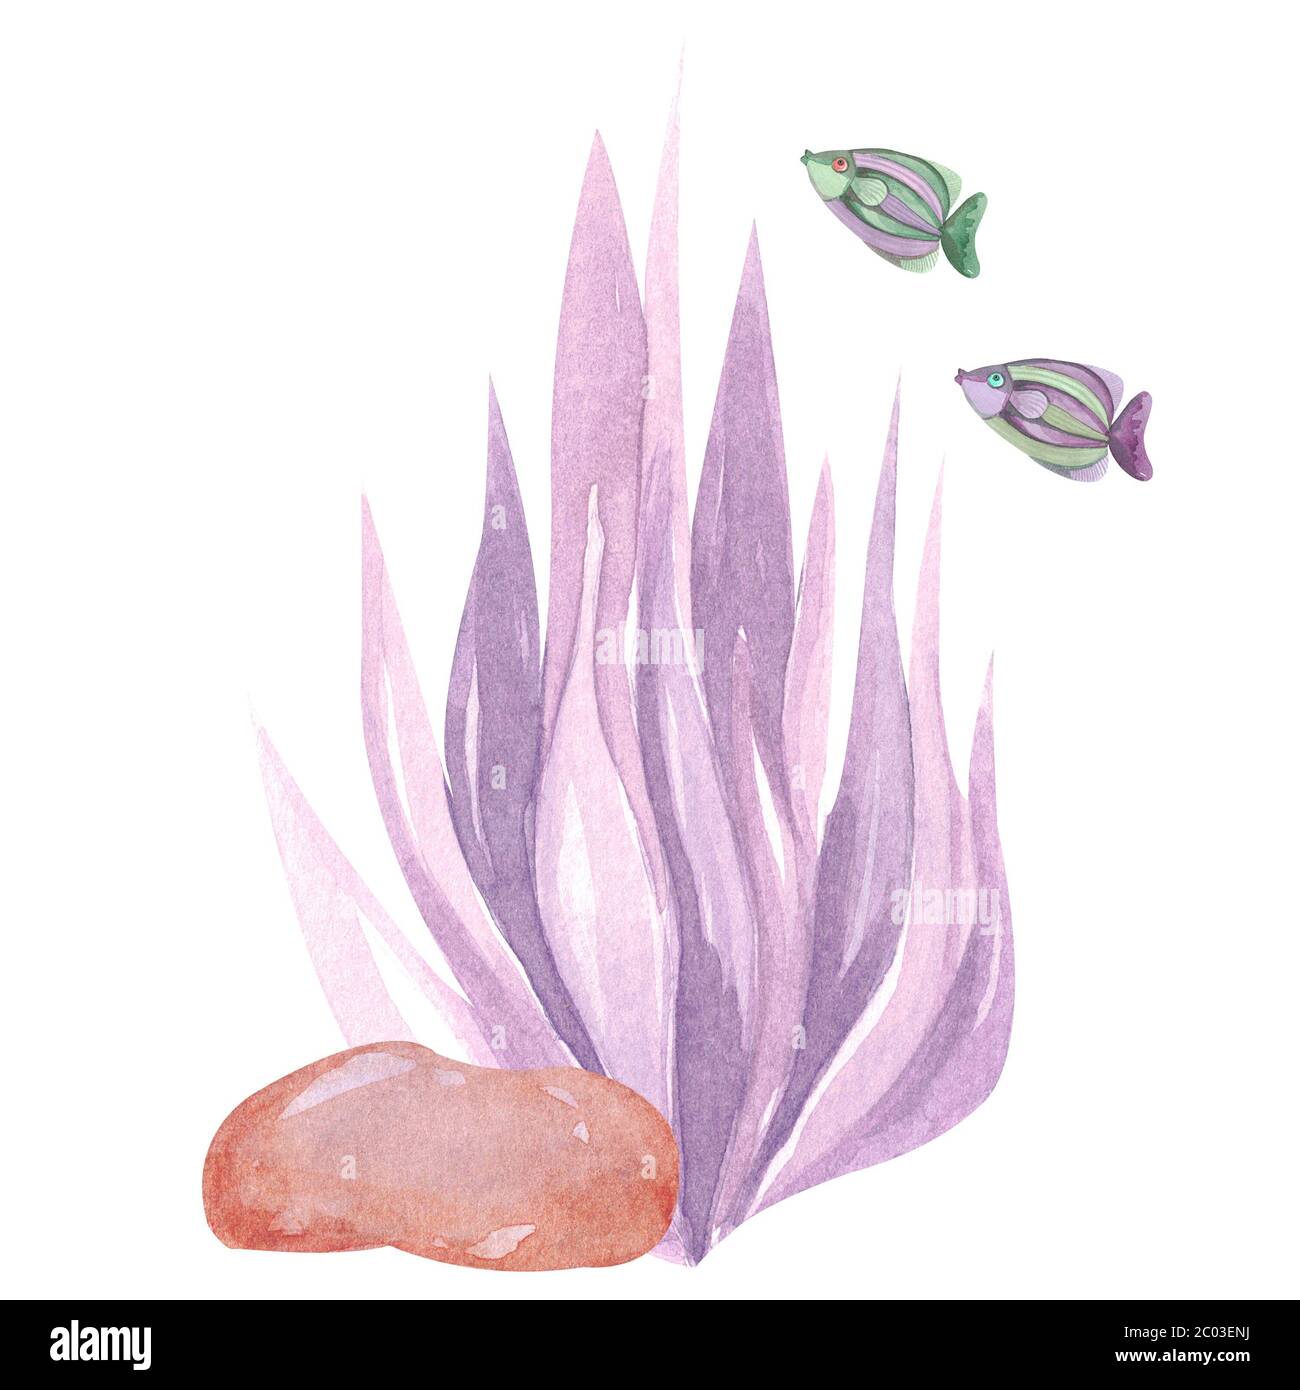 Hand-painted composition of sea coral purple brown stone fish on a white background. Watercolor illustration of the underwater world Stock Photo